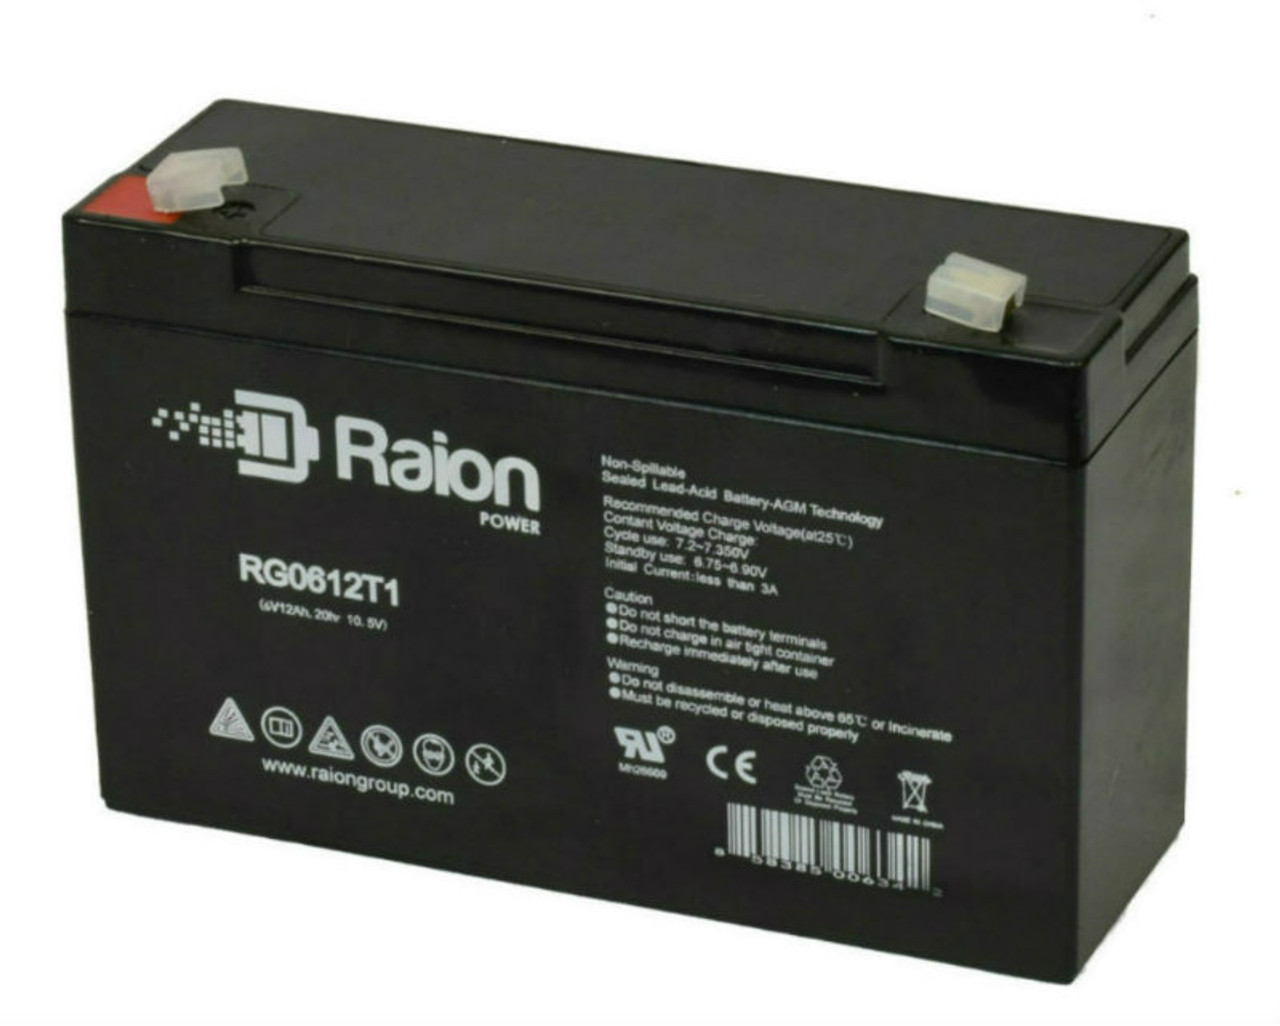 Raion Power RG06120T1 Replacement 6V 12Ah Emergency Light Battery for Holophane M13